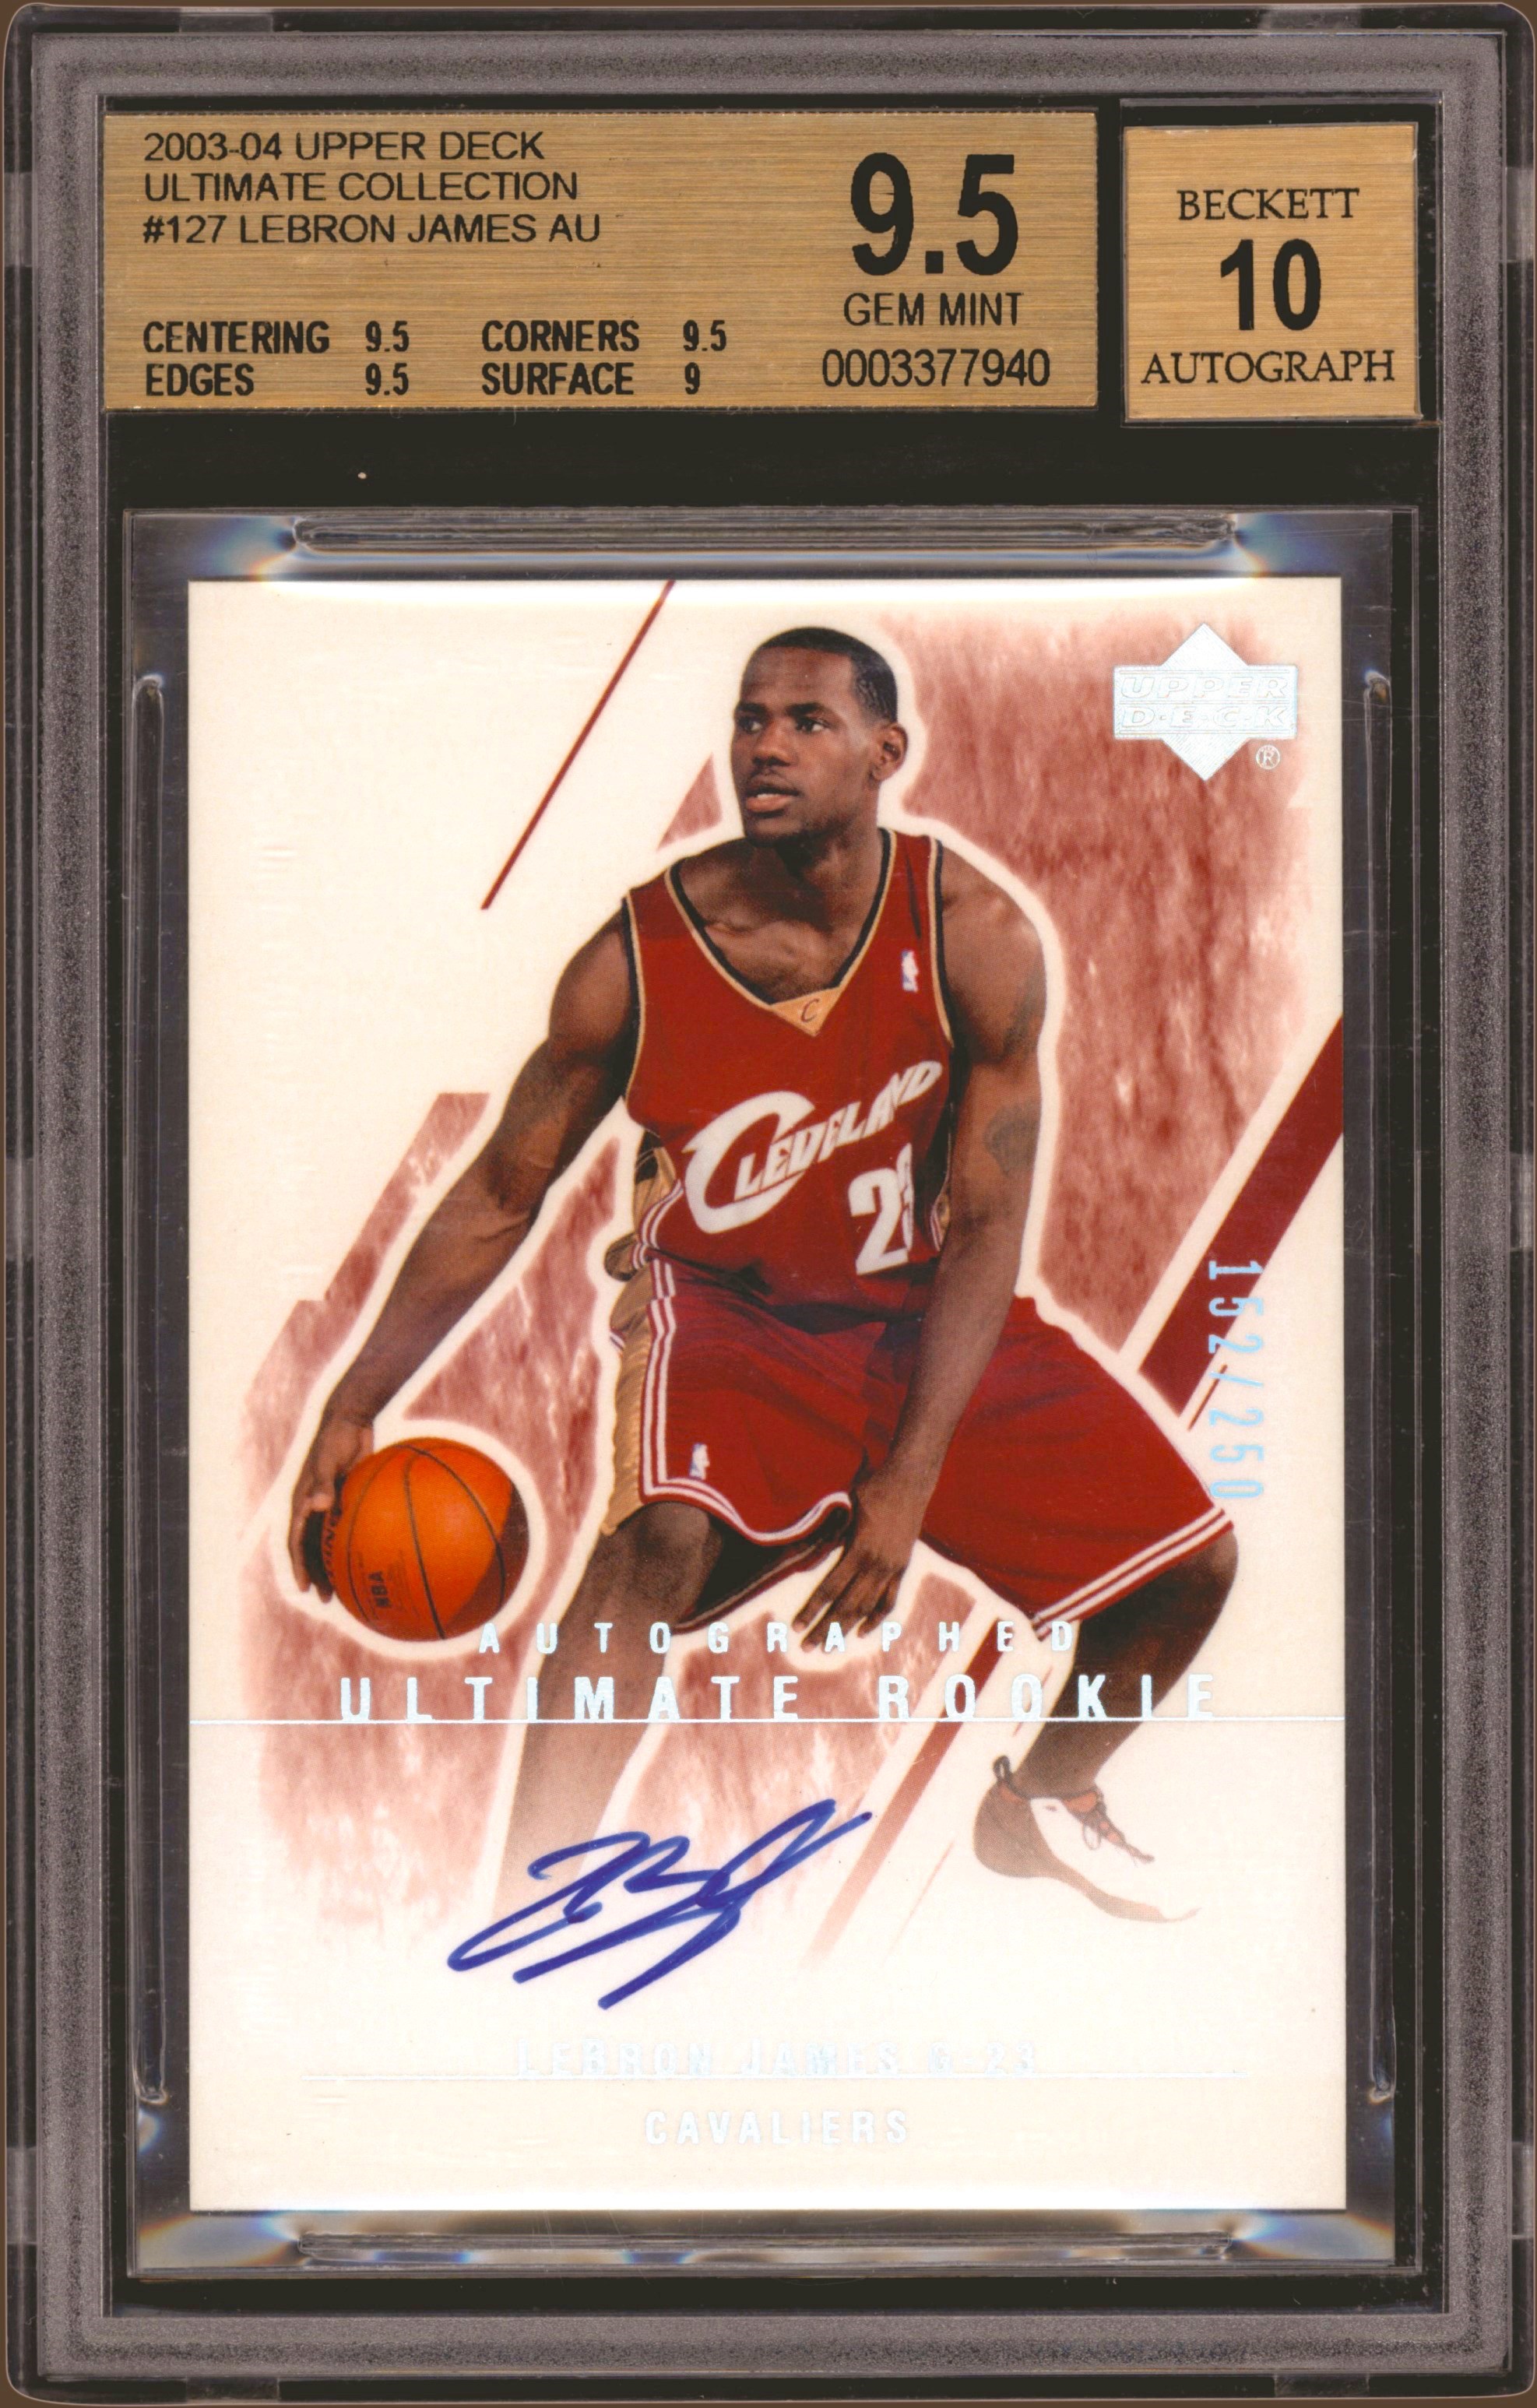 Modern Sports Cards - 2003 Ultimate Collection #127 LeBron James Autographed Rookie 152/250 BGS GEM MINT 9.5 - Auto 10